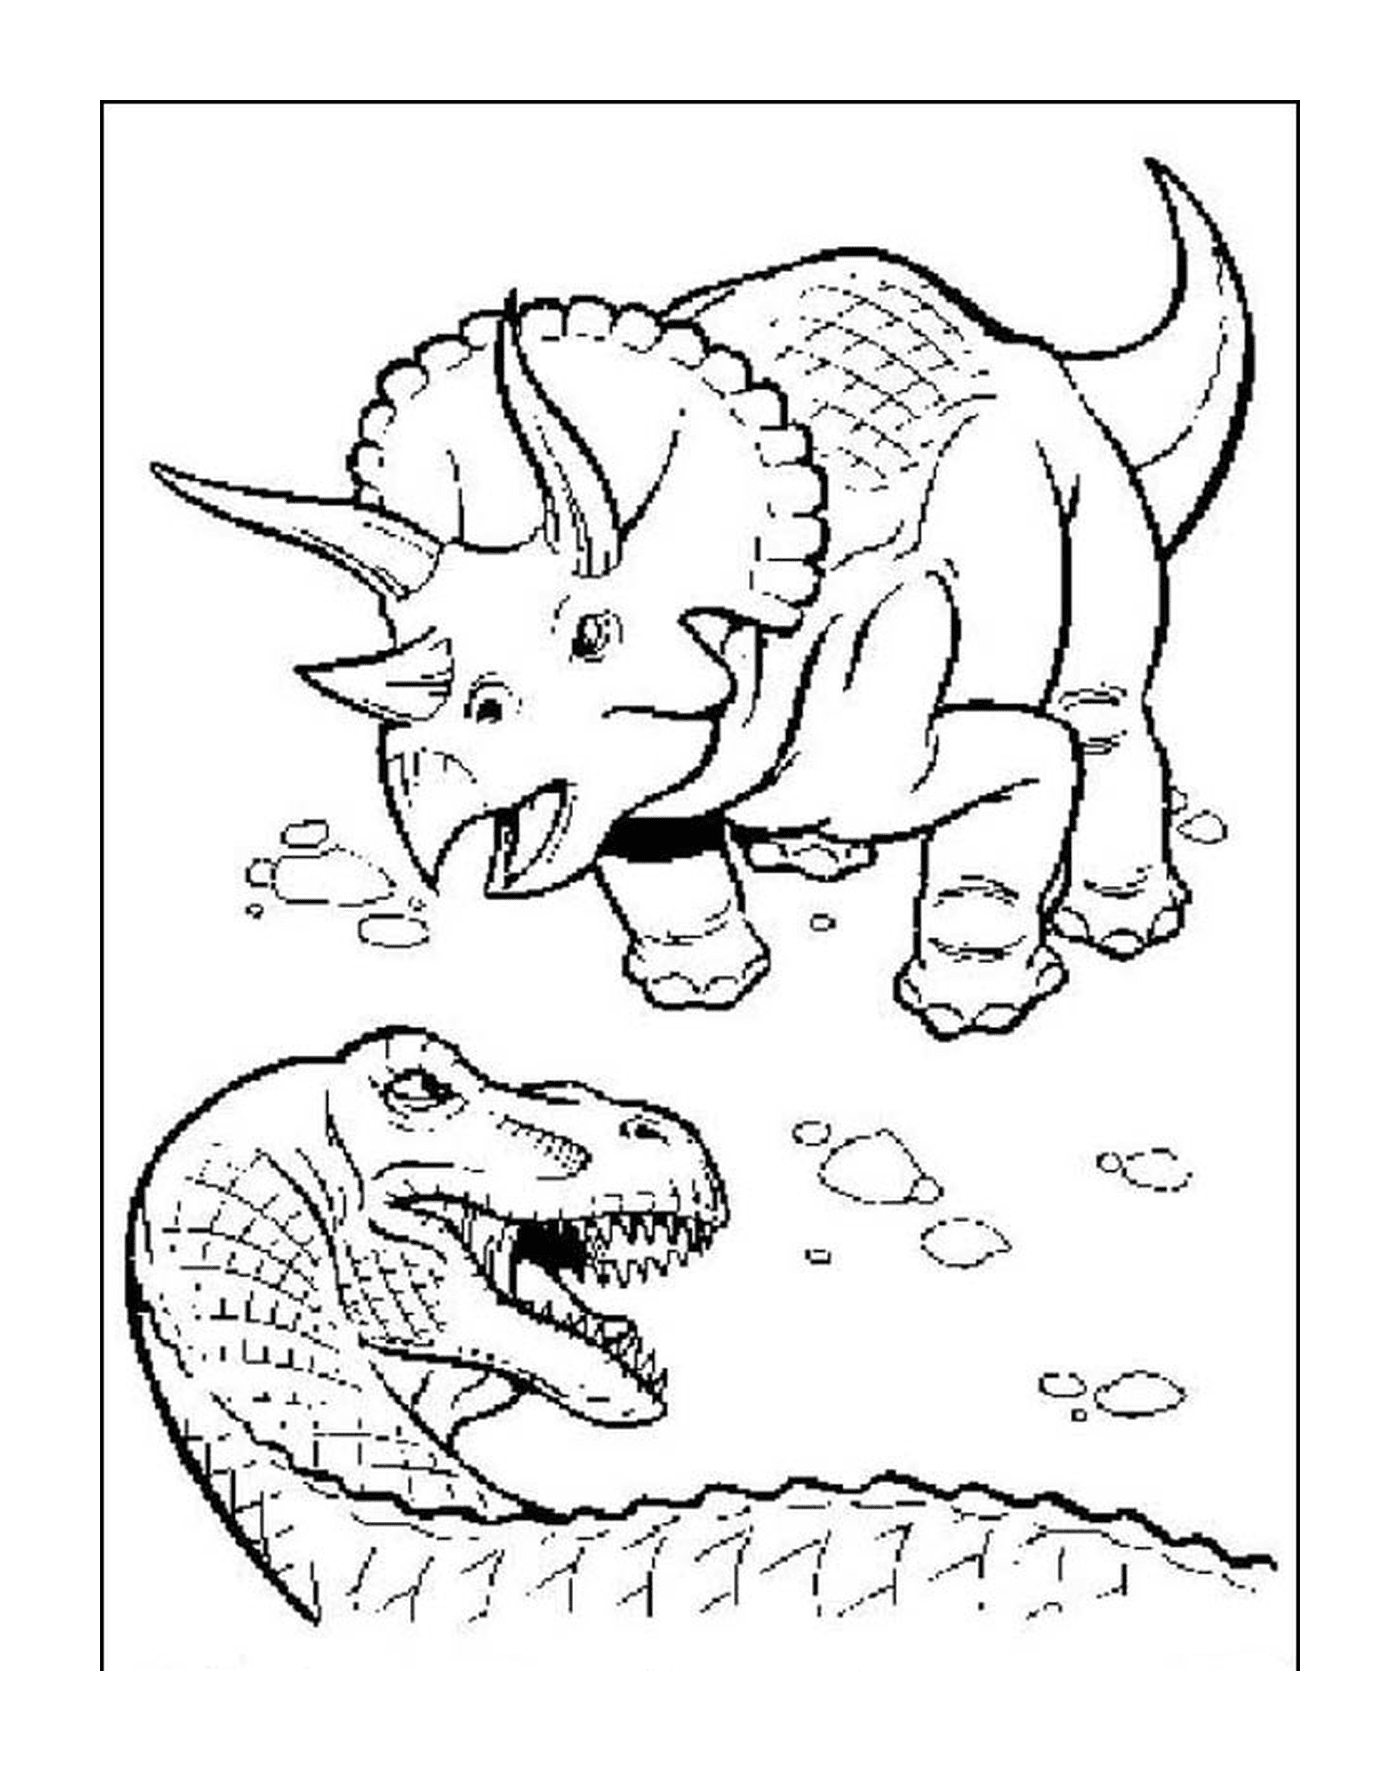  A triceratops and a tyrannosaur 